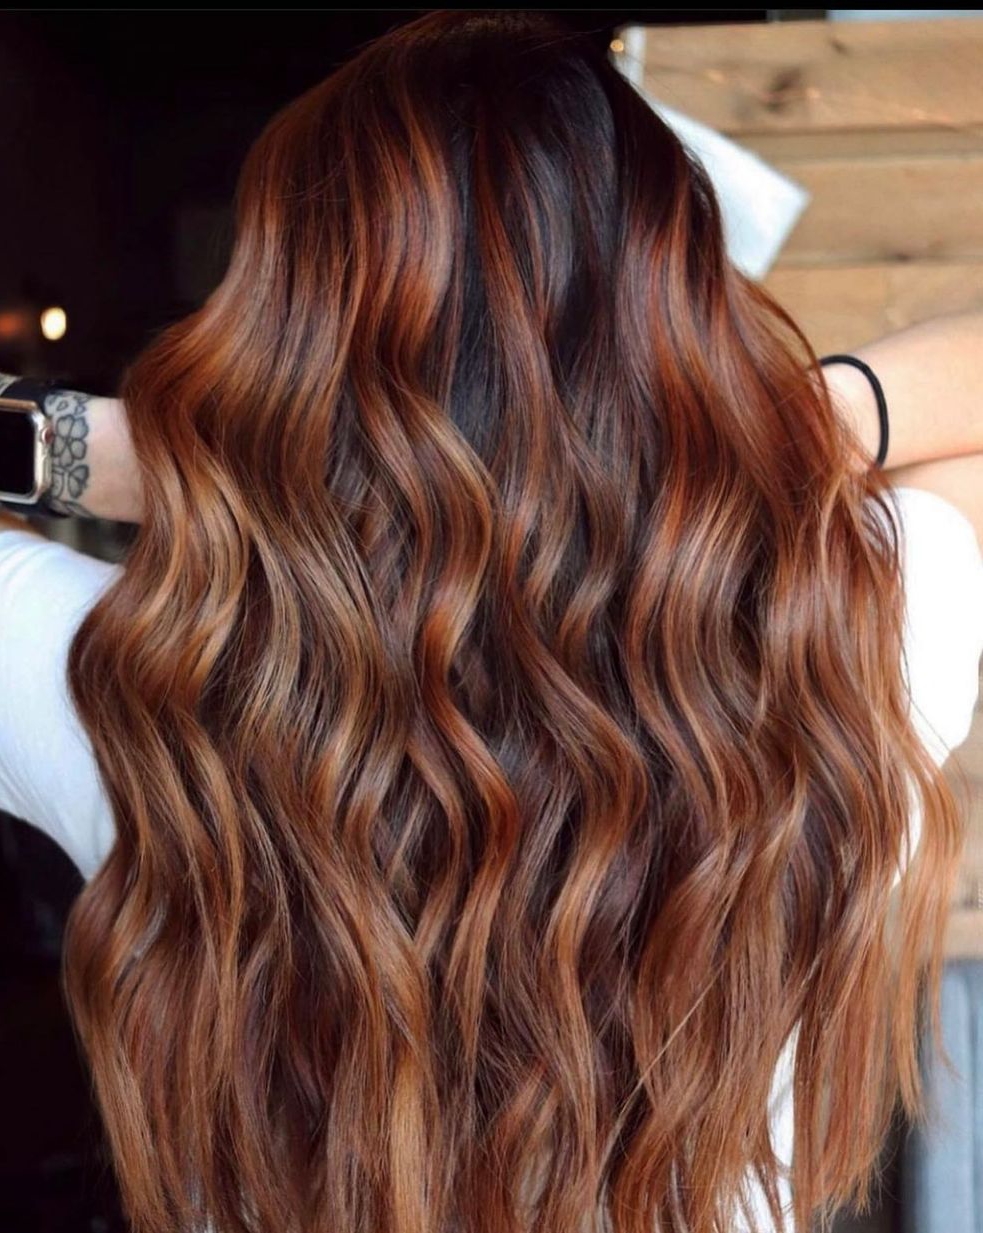 Chesnut and Red Long Wavy Hair